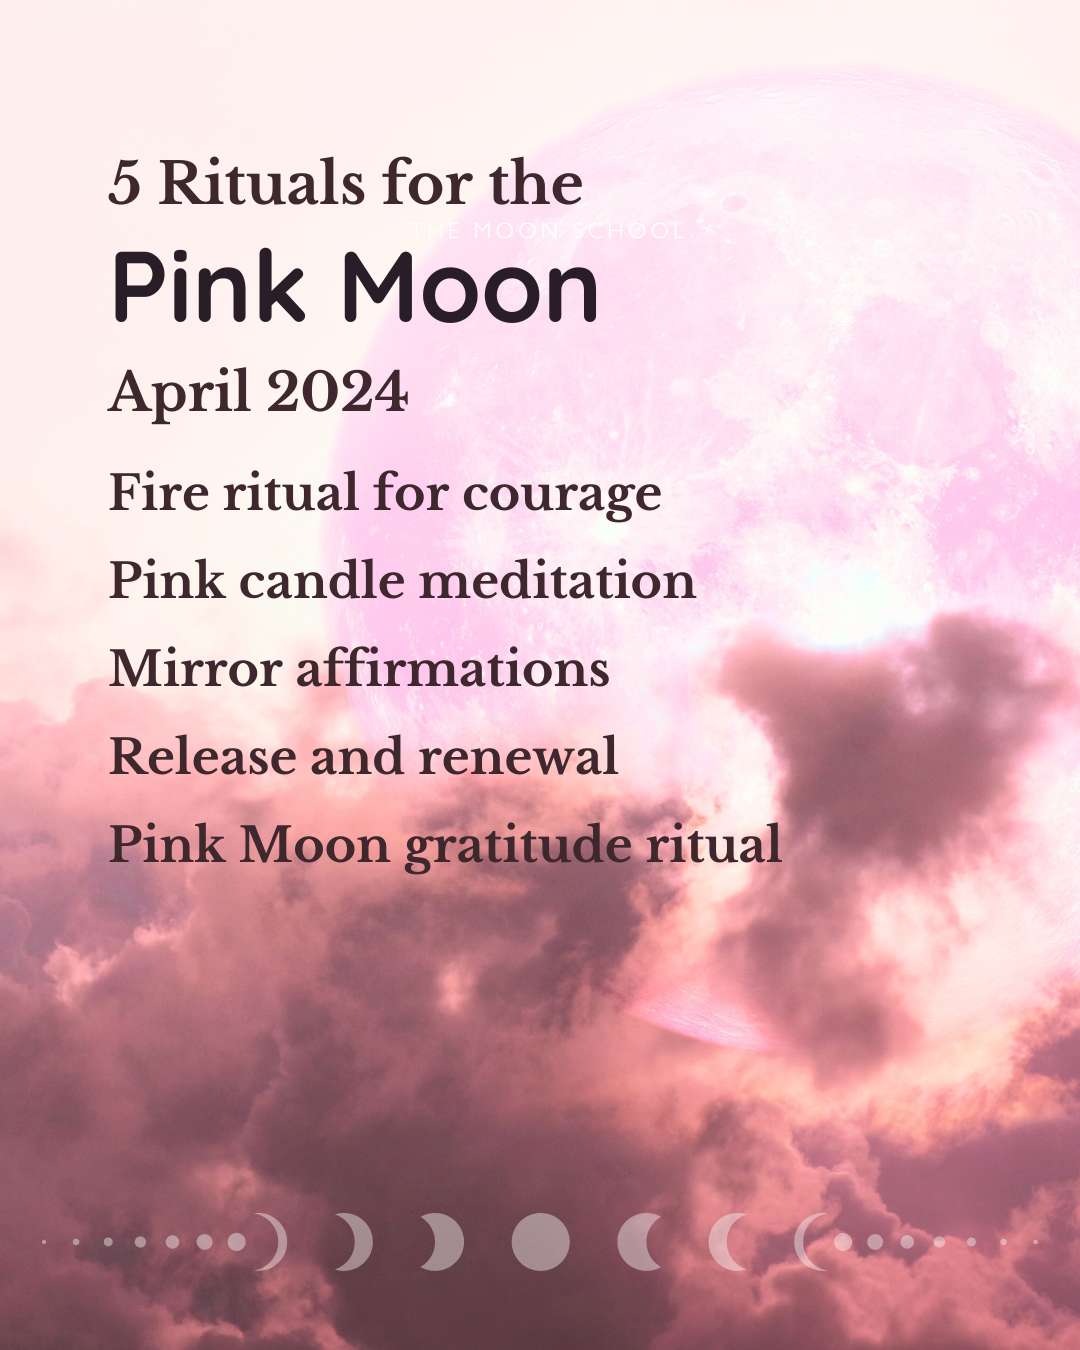 List of 5 rituals to perform on the Pink Moon